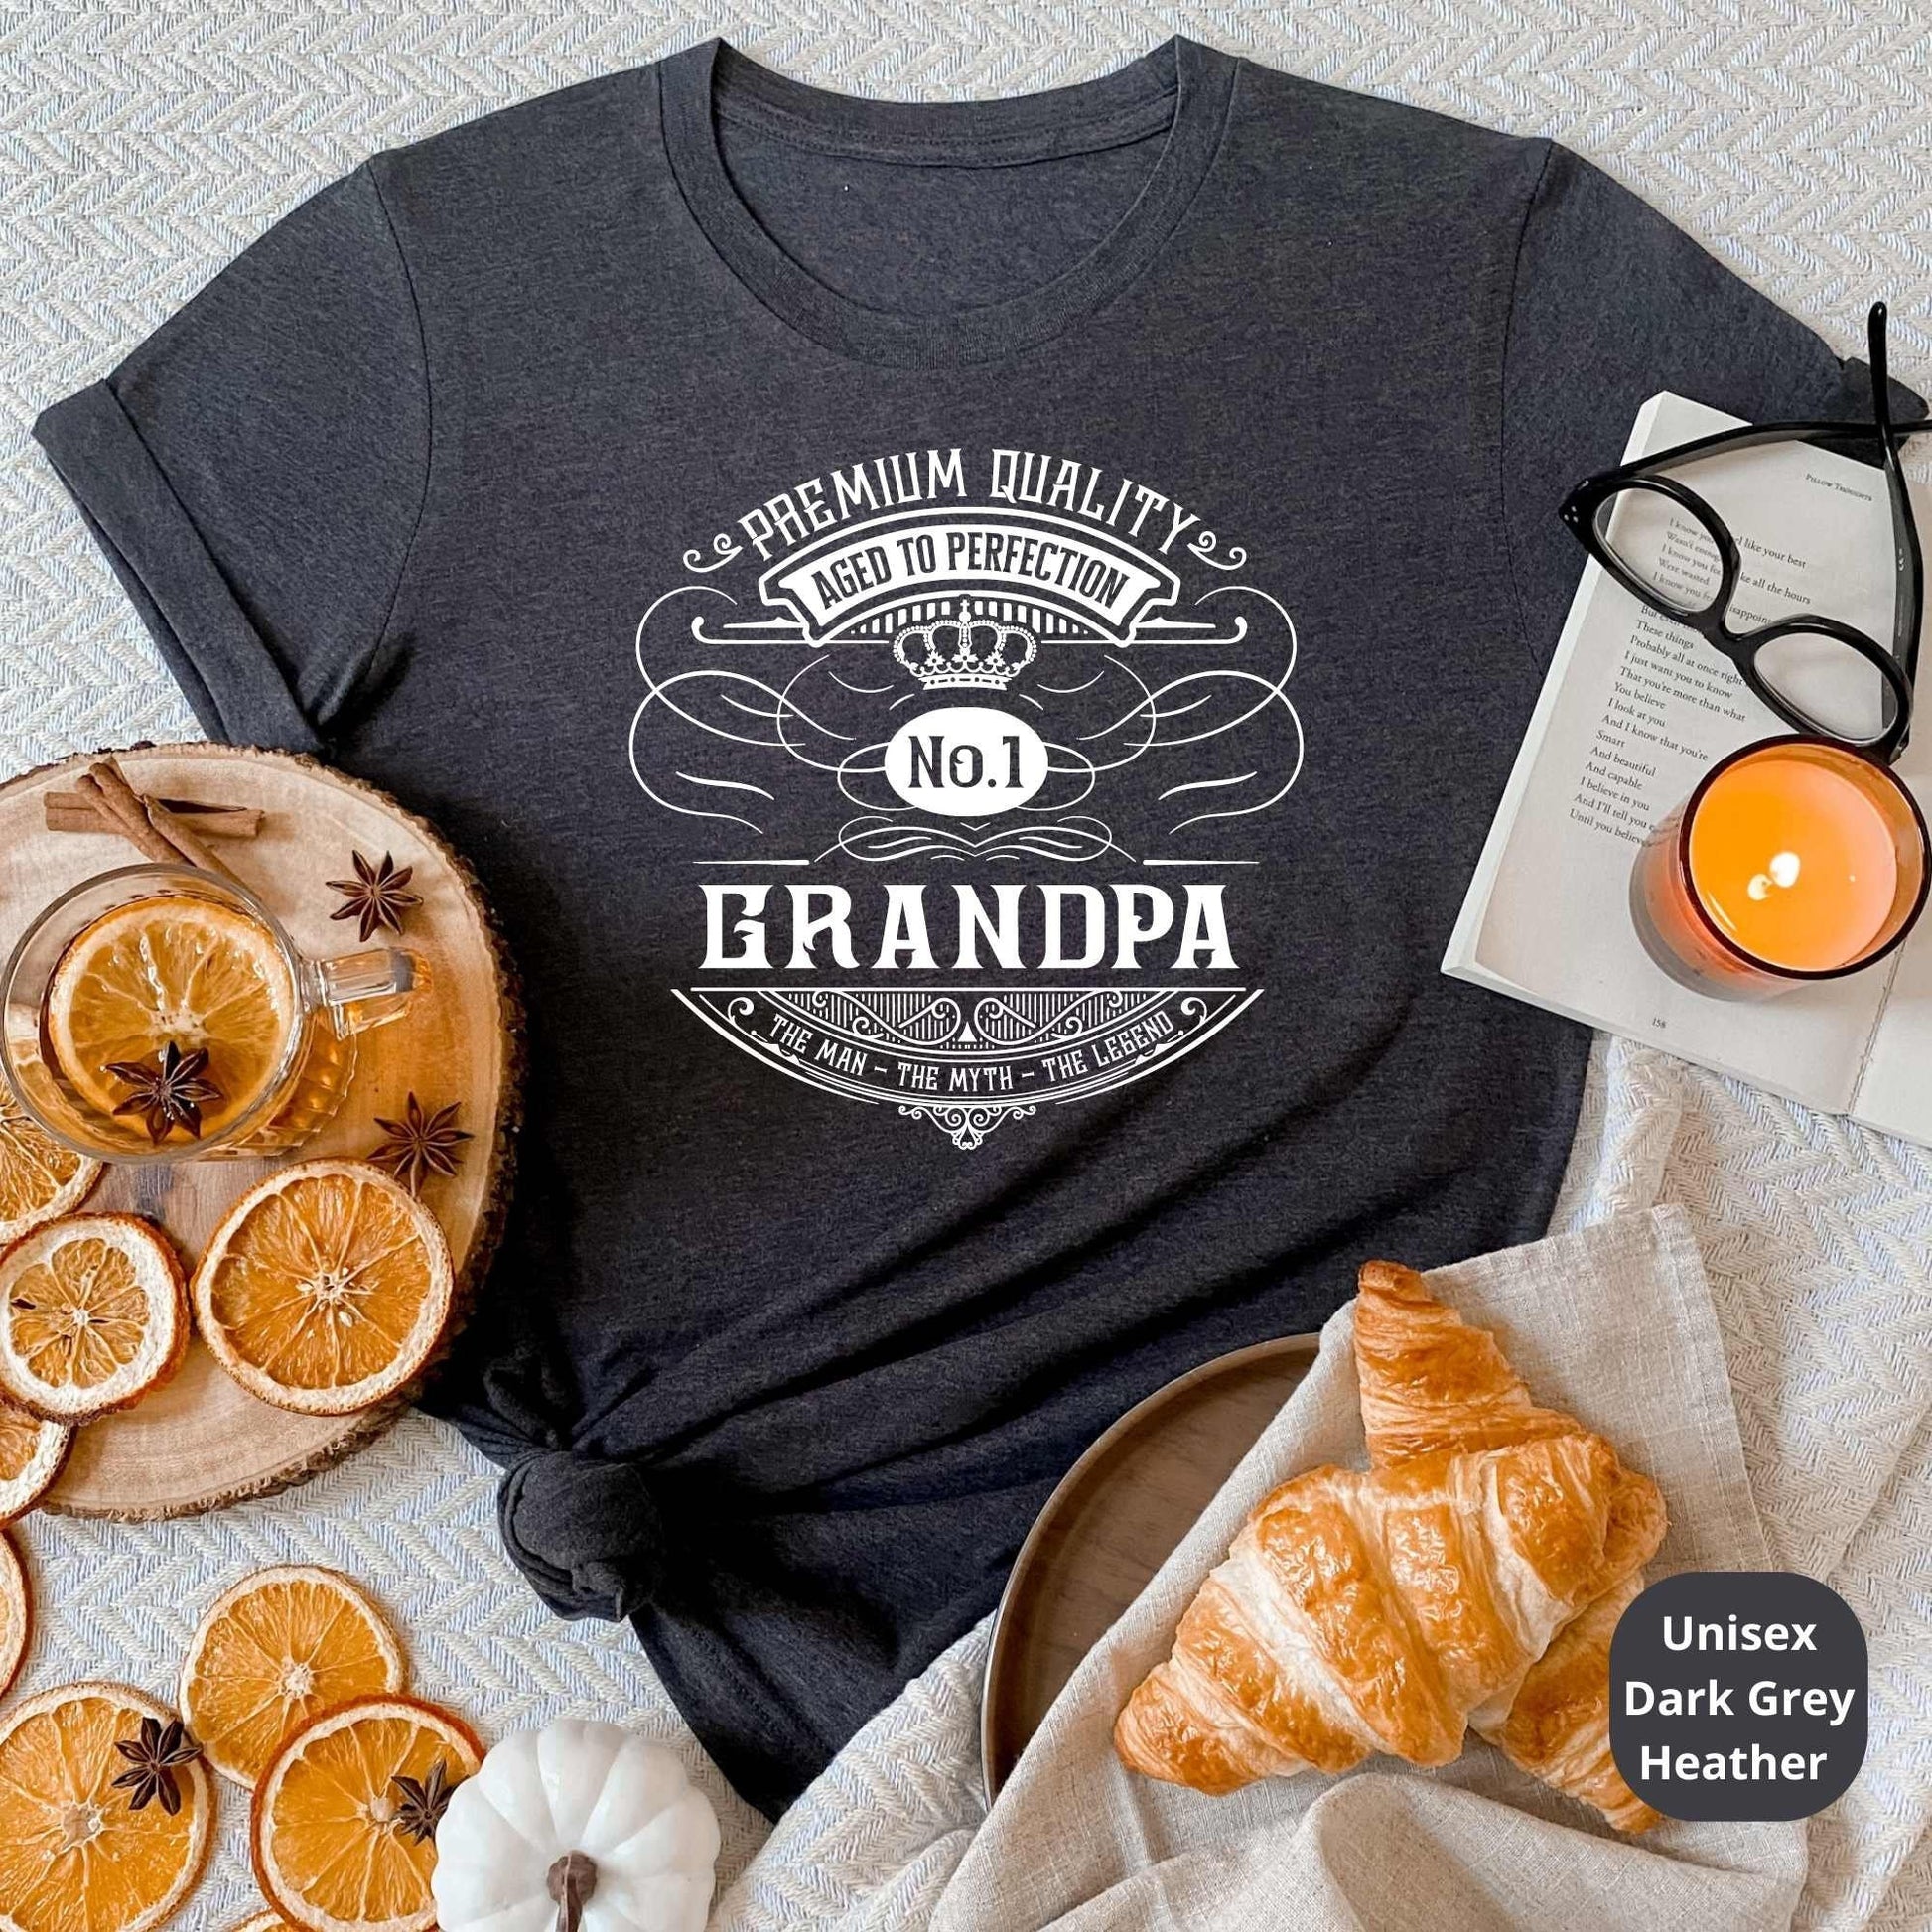 Family Reunion Matching Tees for Photos, Pregnancy Reveal Shirts, Baby Announcement Photographs, Baby Shower, Parents & Grandparents Gifts